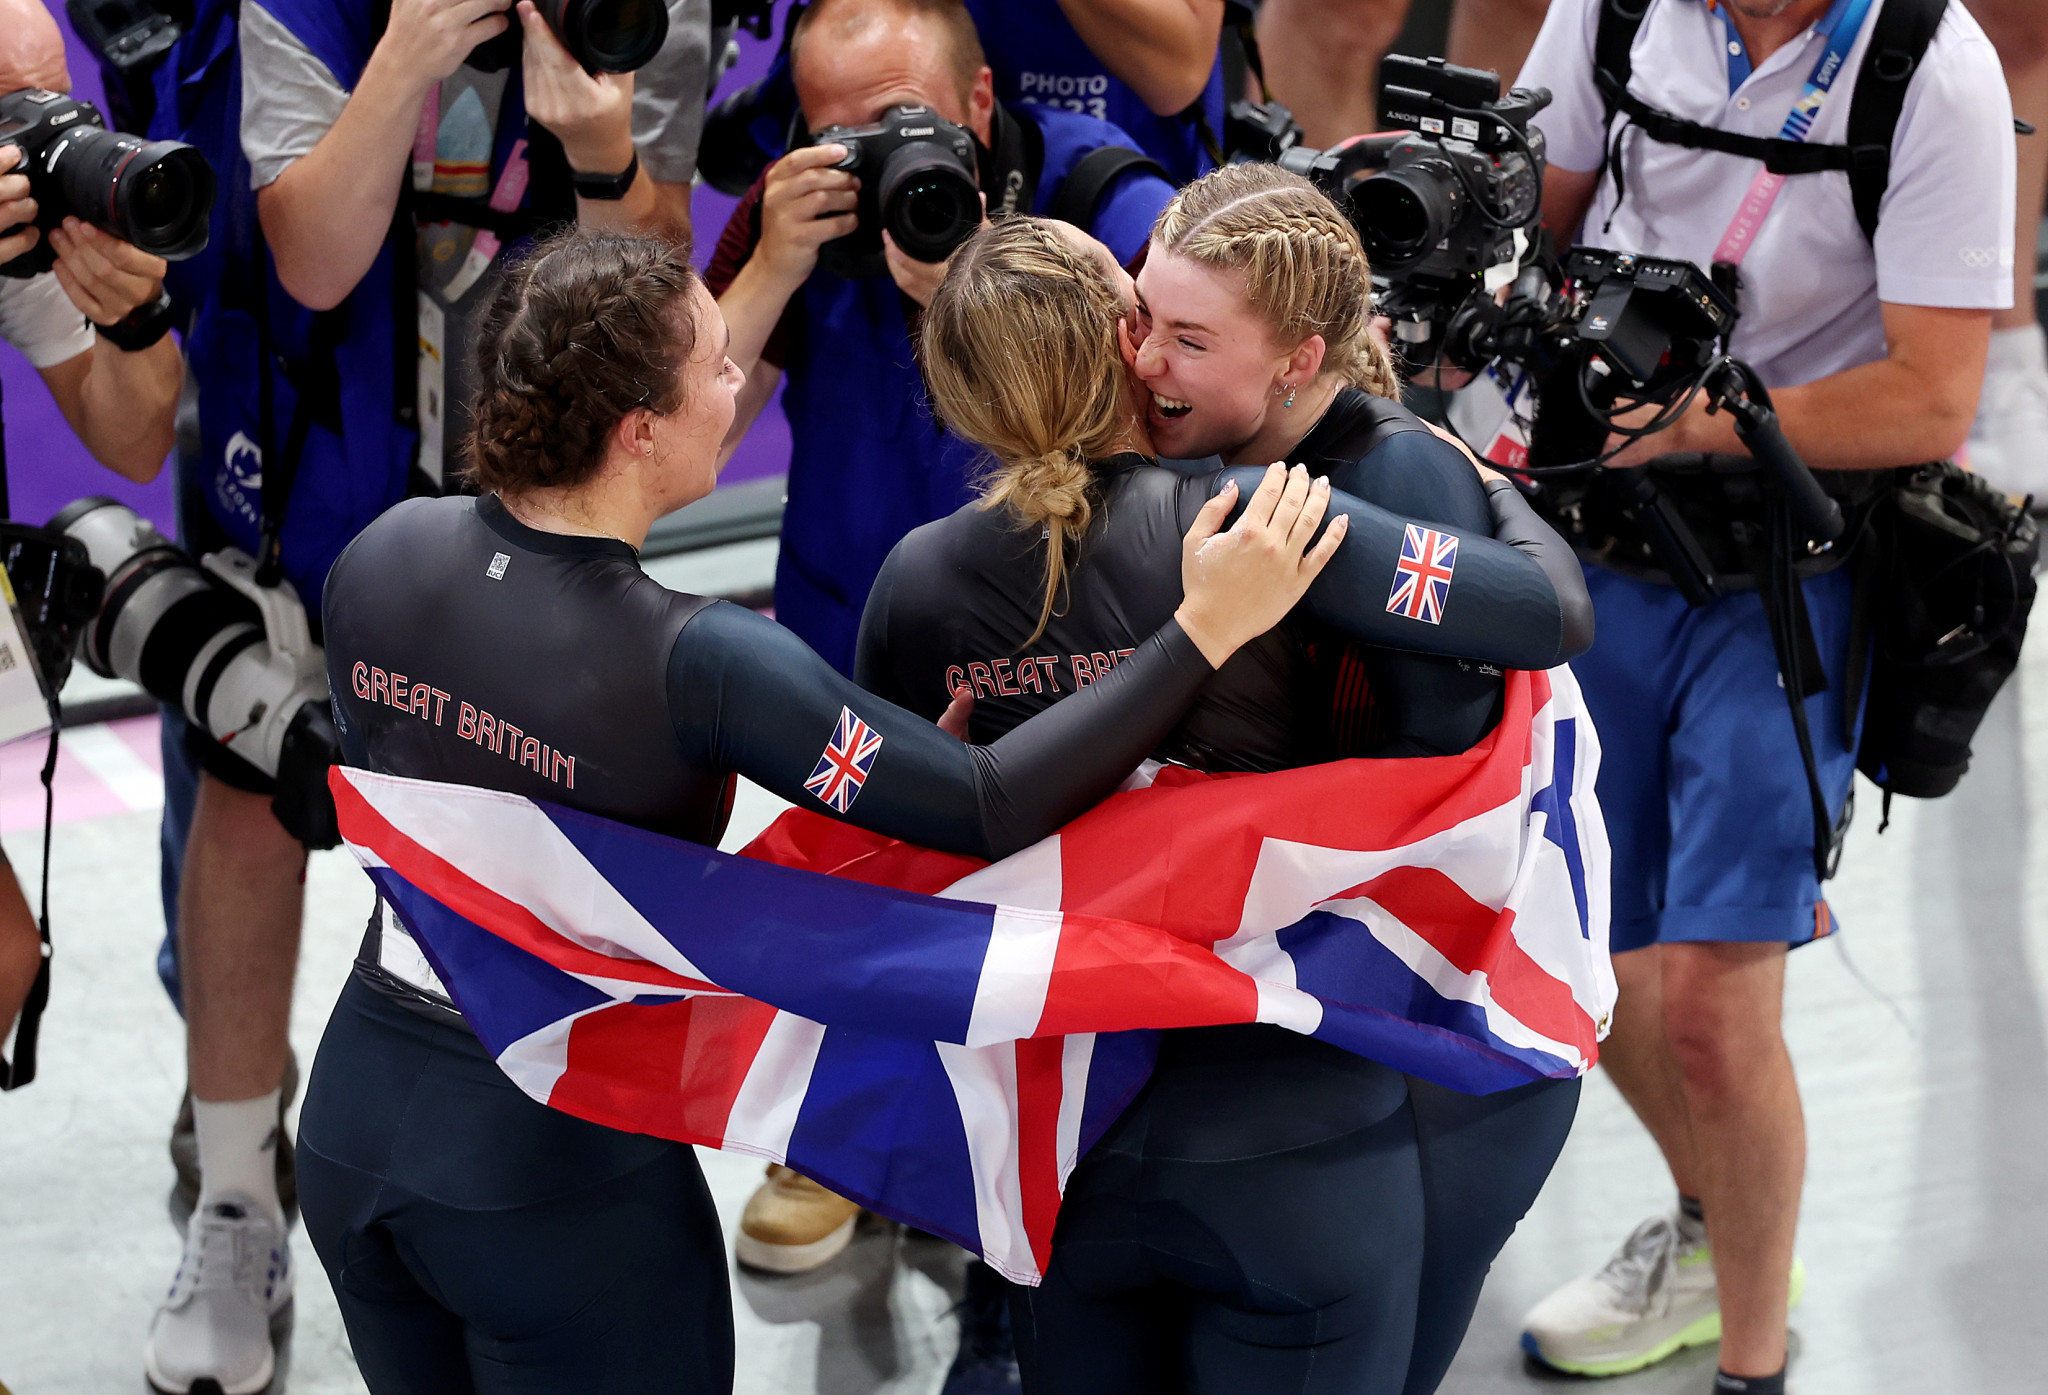 Katy Marchant, Sophie Capewell and Emma Finucane of Team Great Britain celebrate winning the Women’s Team Sprint event at the Paris 2024 Olympic Games. GETTY IMAGES